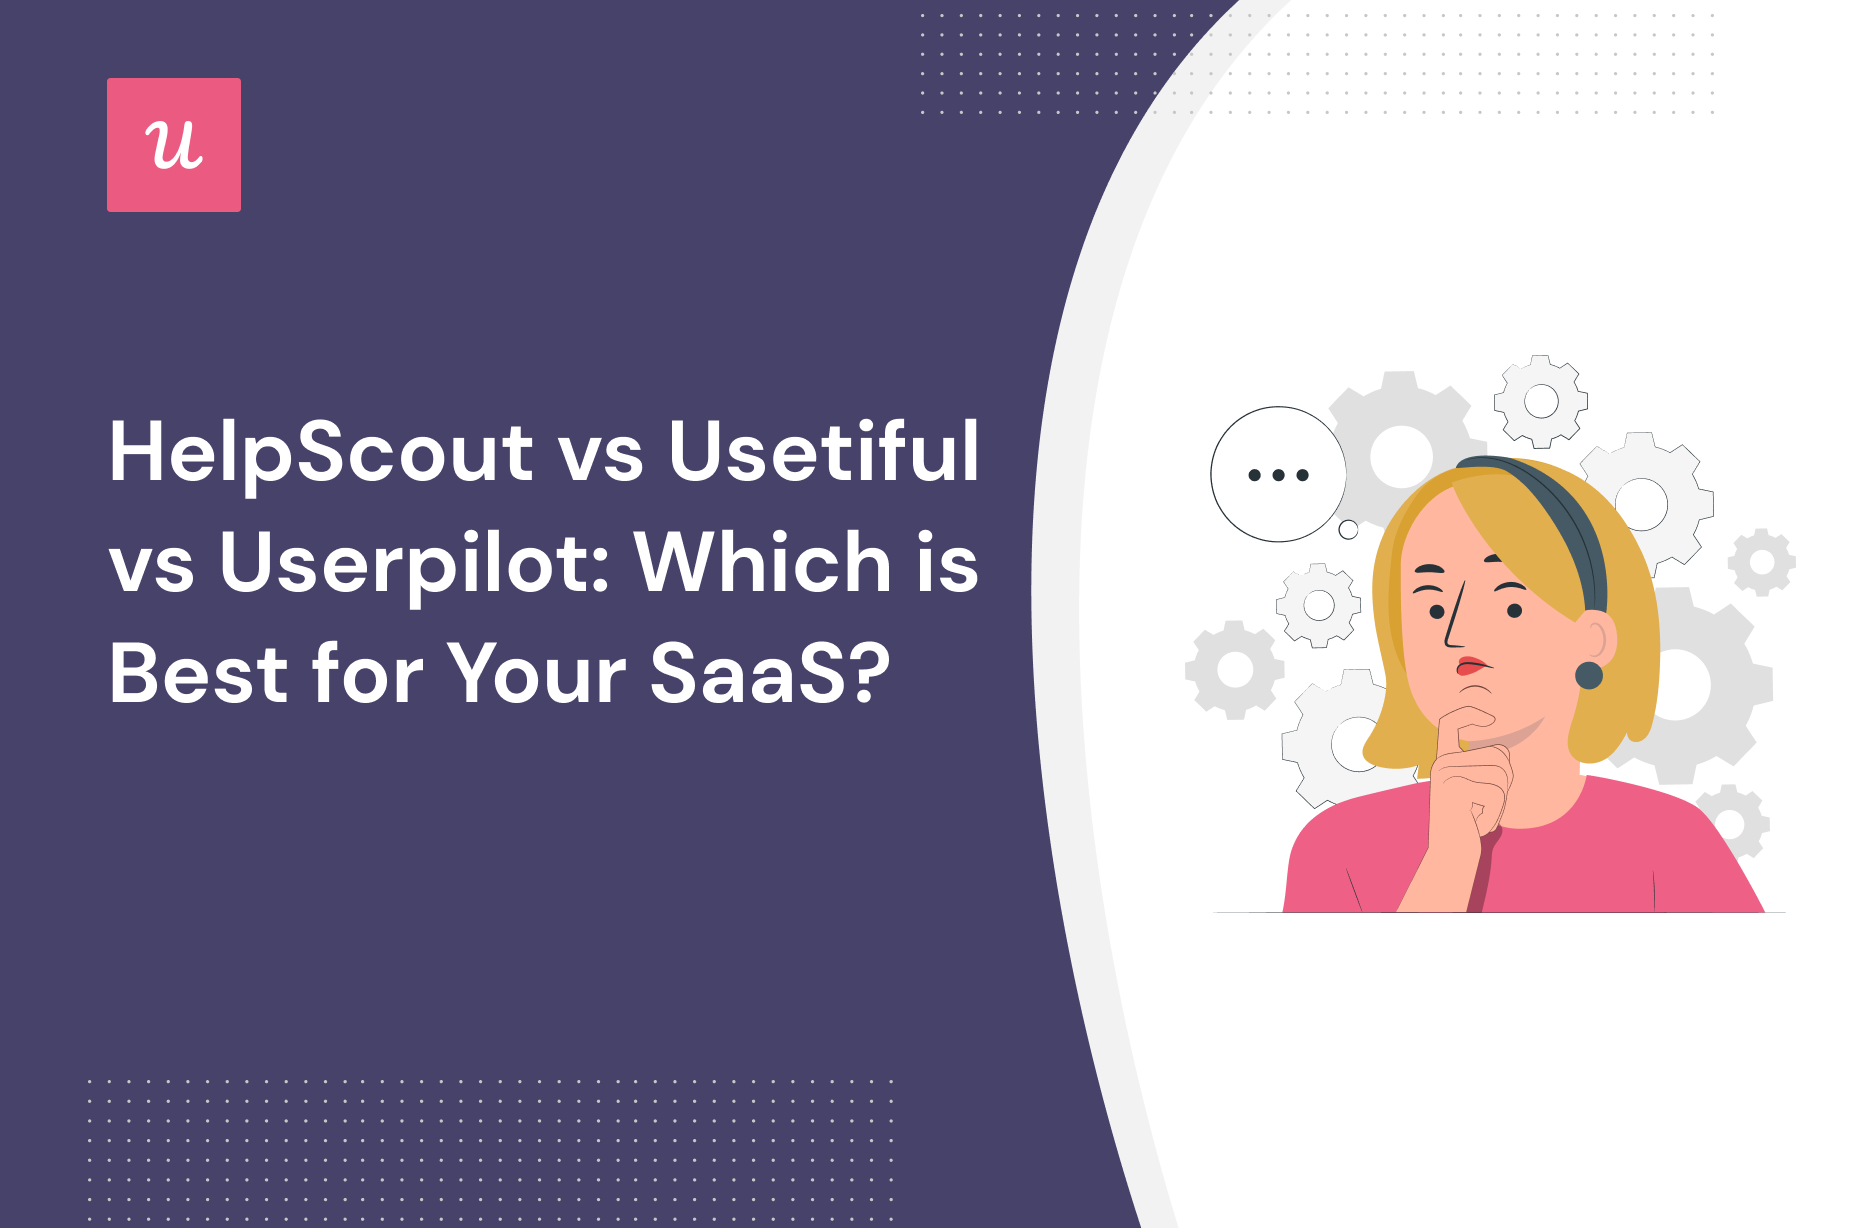 HelpScout vs Usetiful vs Userpilot: Which is Best for Your SaaS?